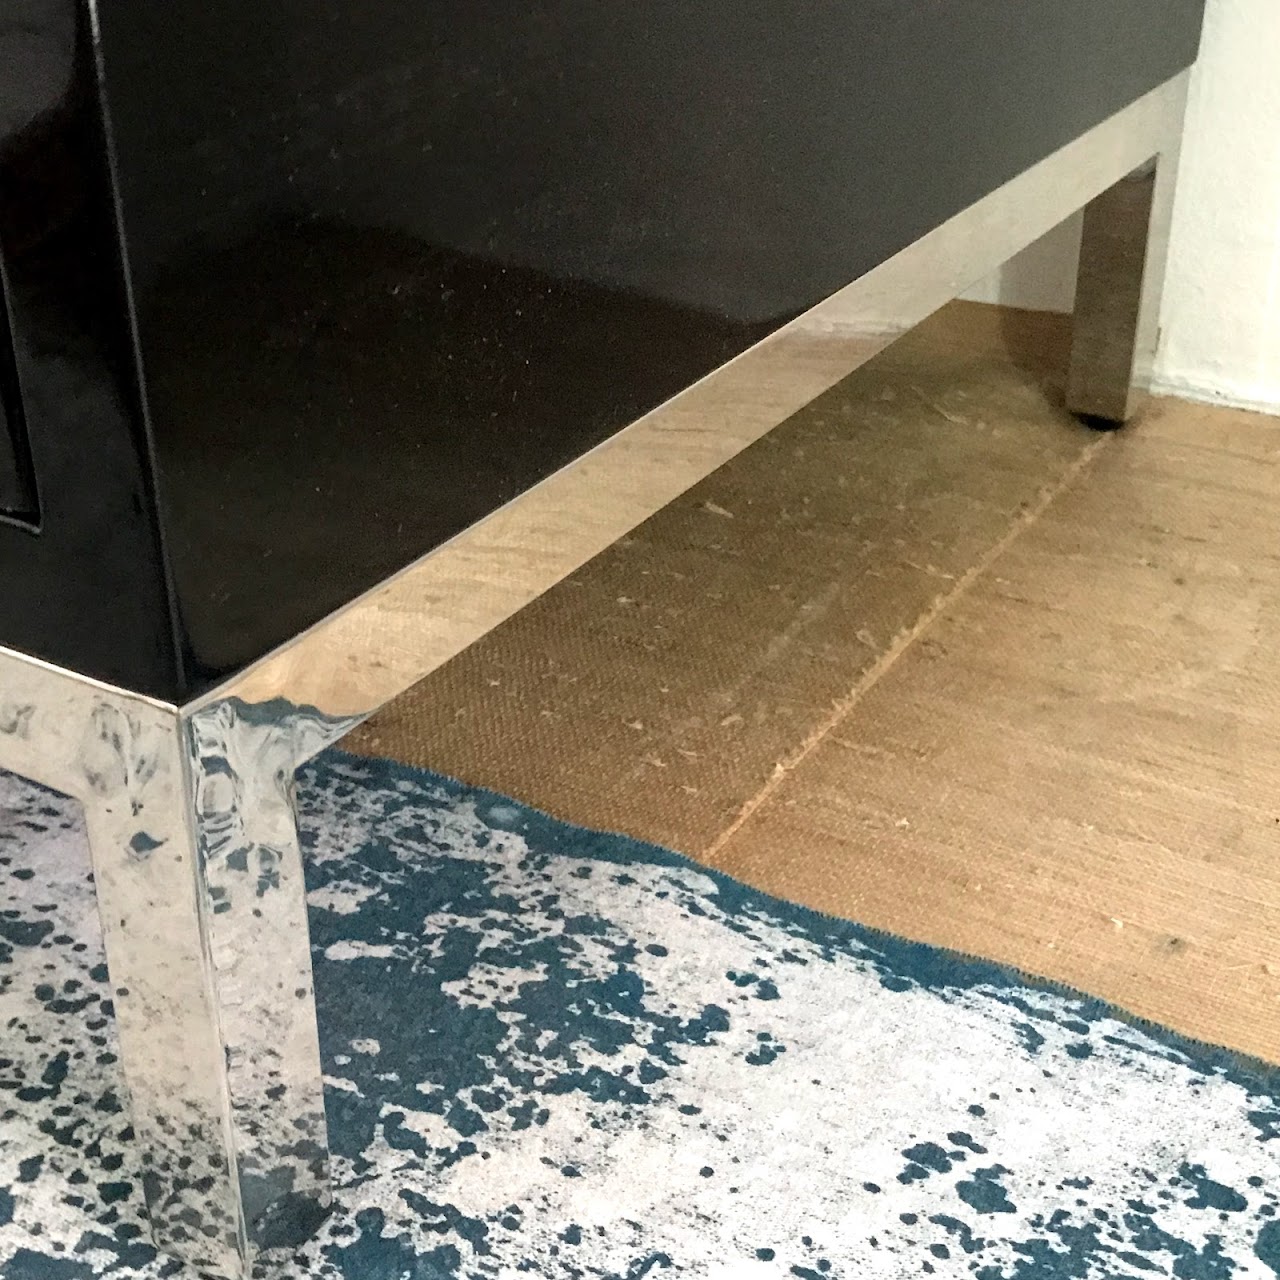 Lacquer & Chrome Mirror Top End Table #1